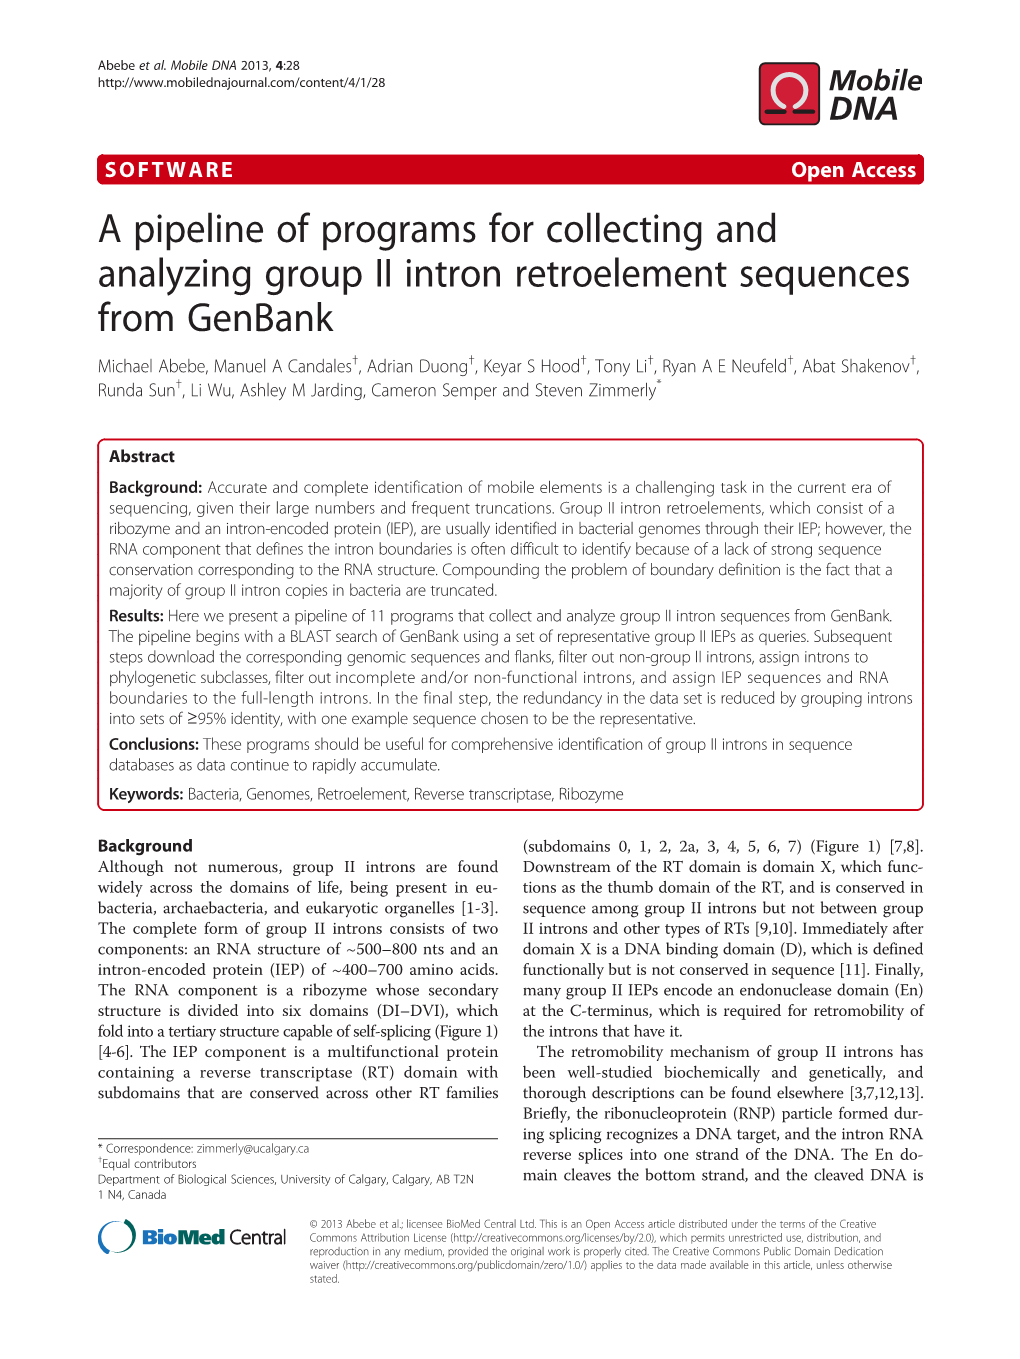 A Pipeline of Programs for Collecting and Analyzing Group II Intron